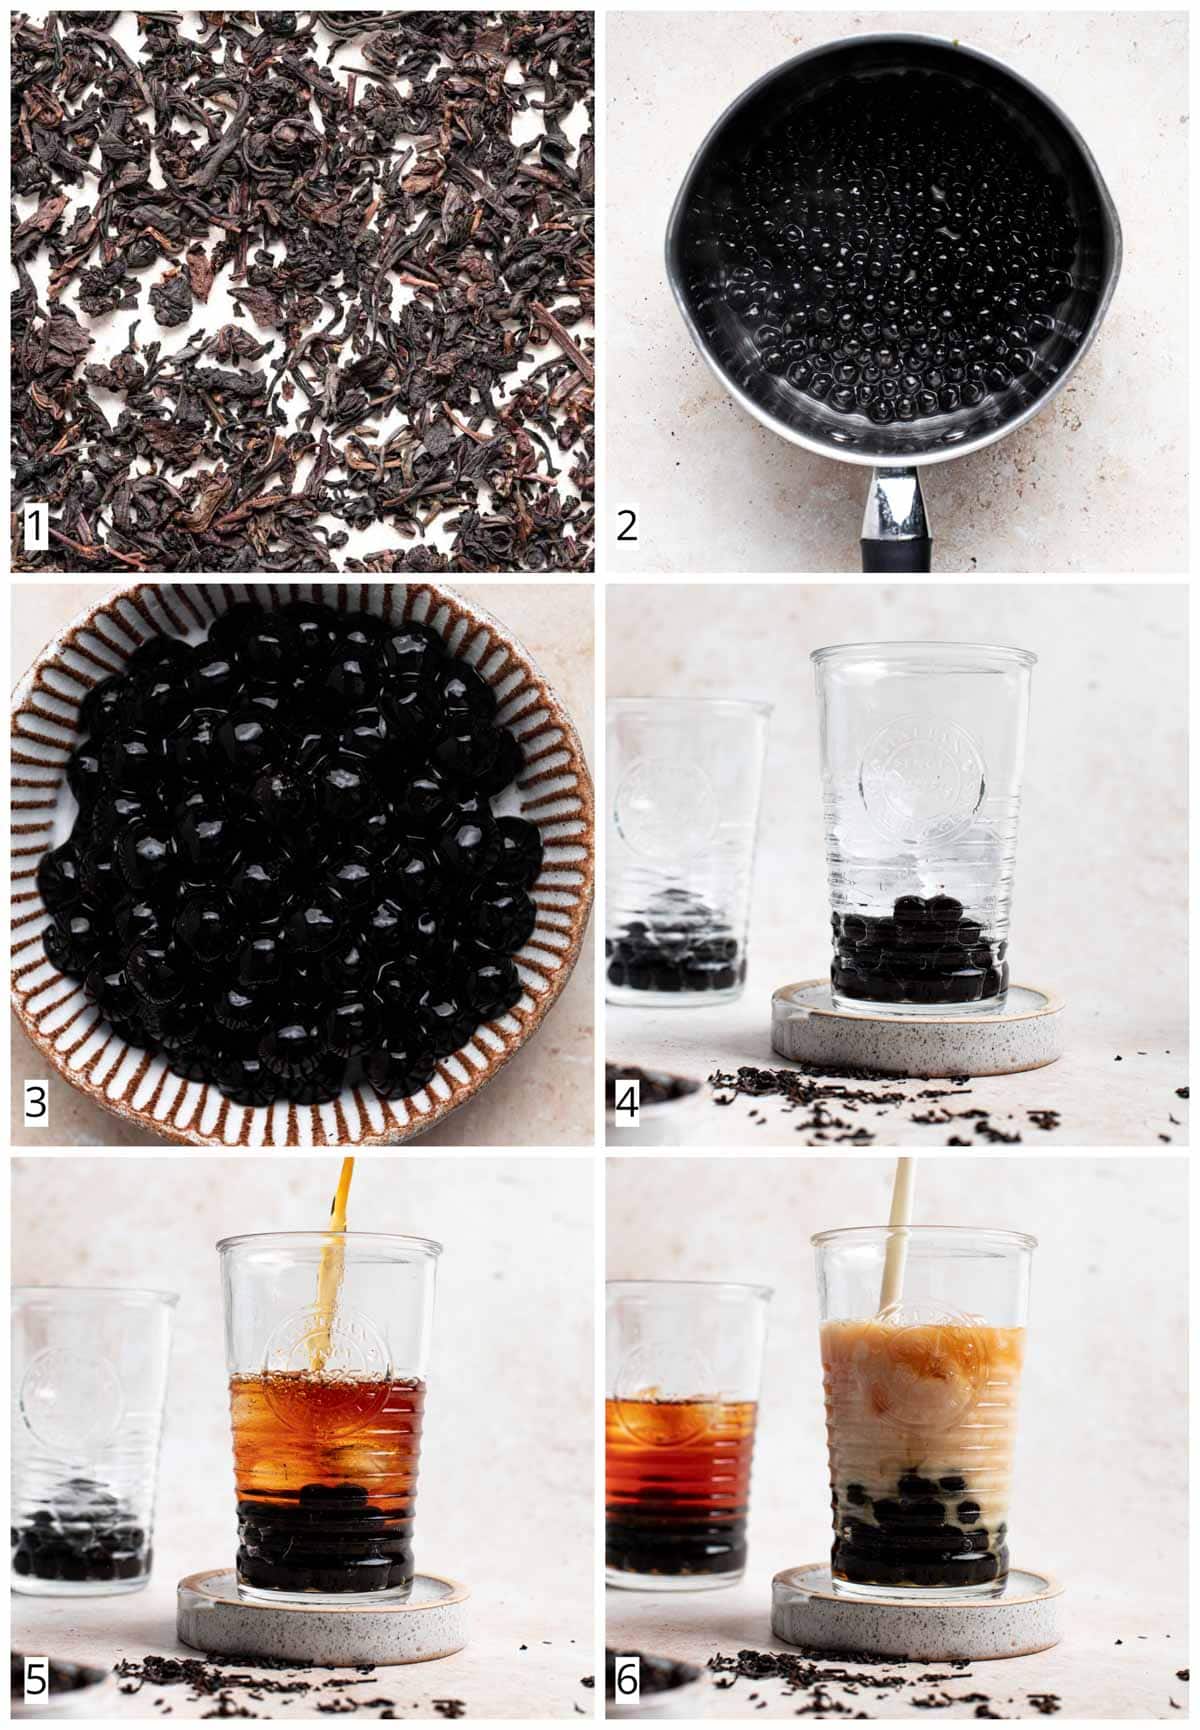 A collage of six images showing the steps in making Oolong boba.